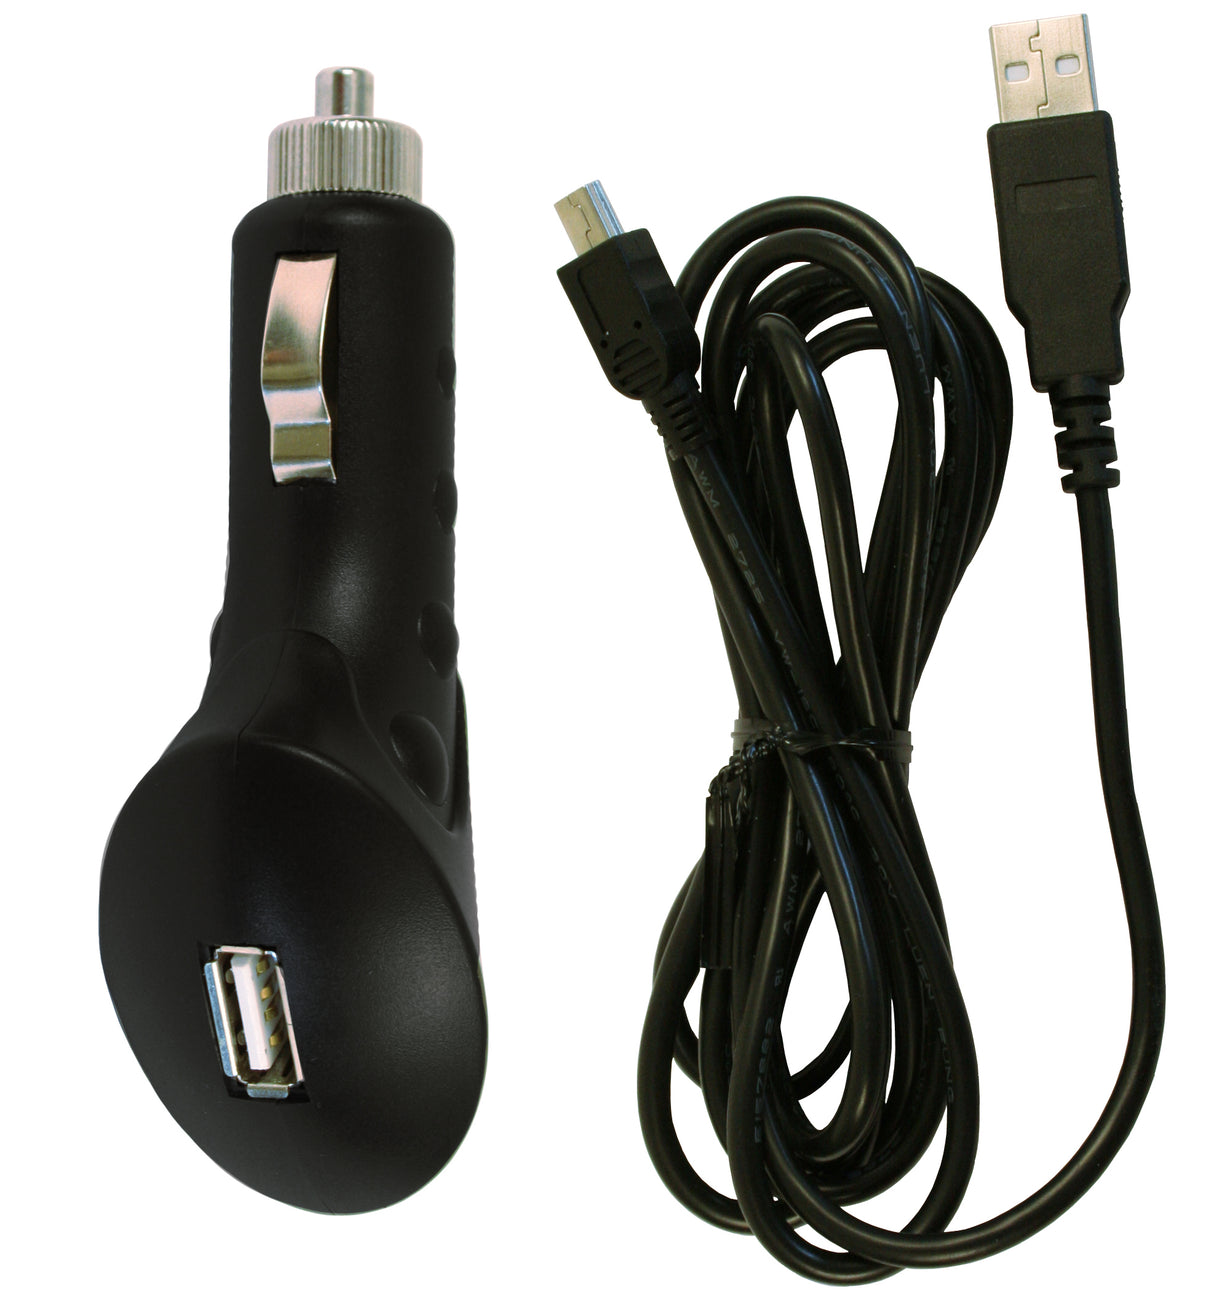 The included power supply plugs into a vehicle's power port or cigarette lighter.